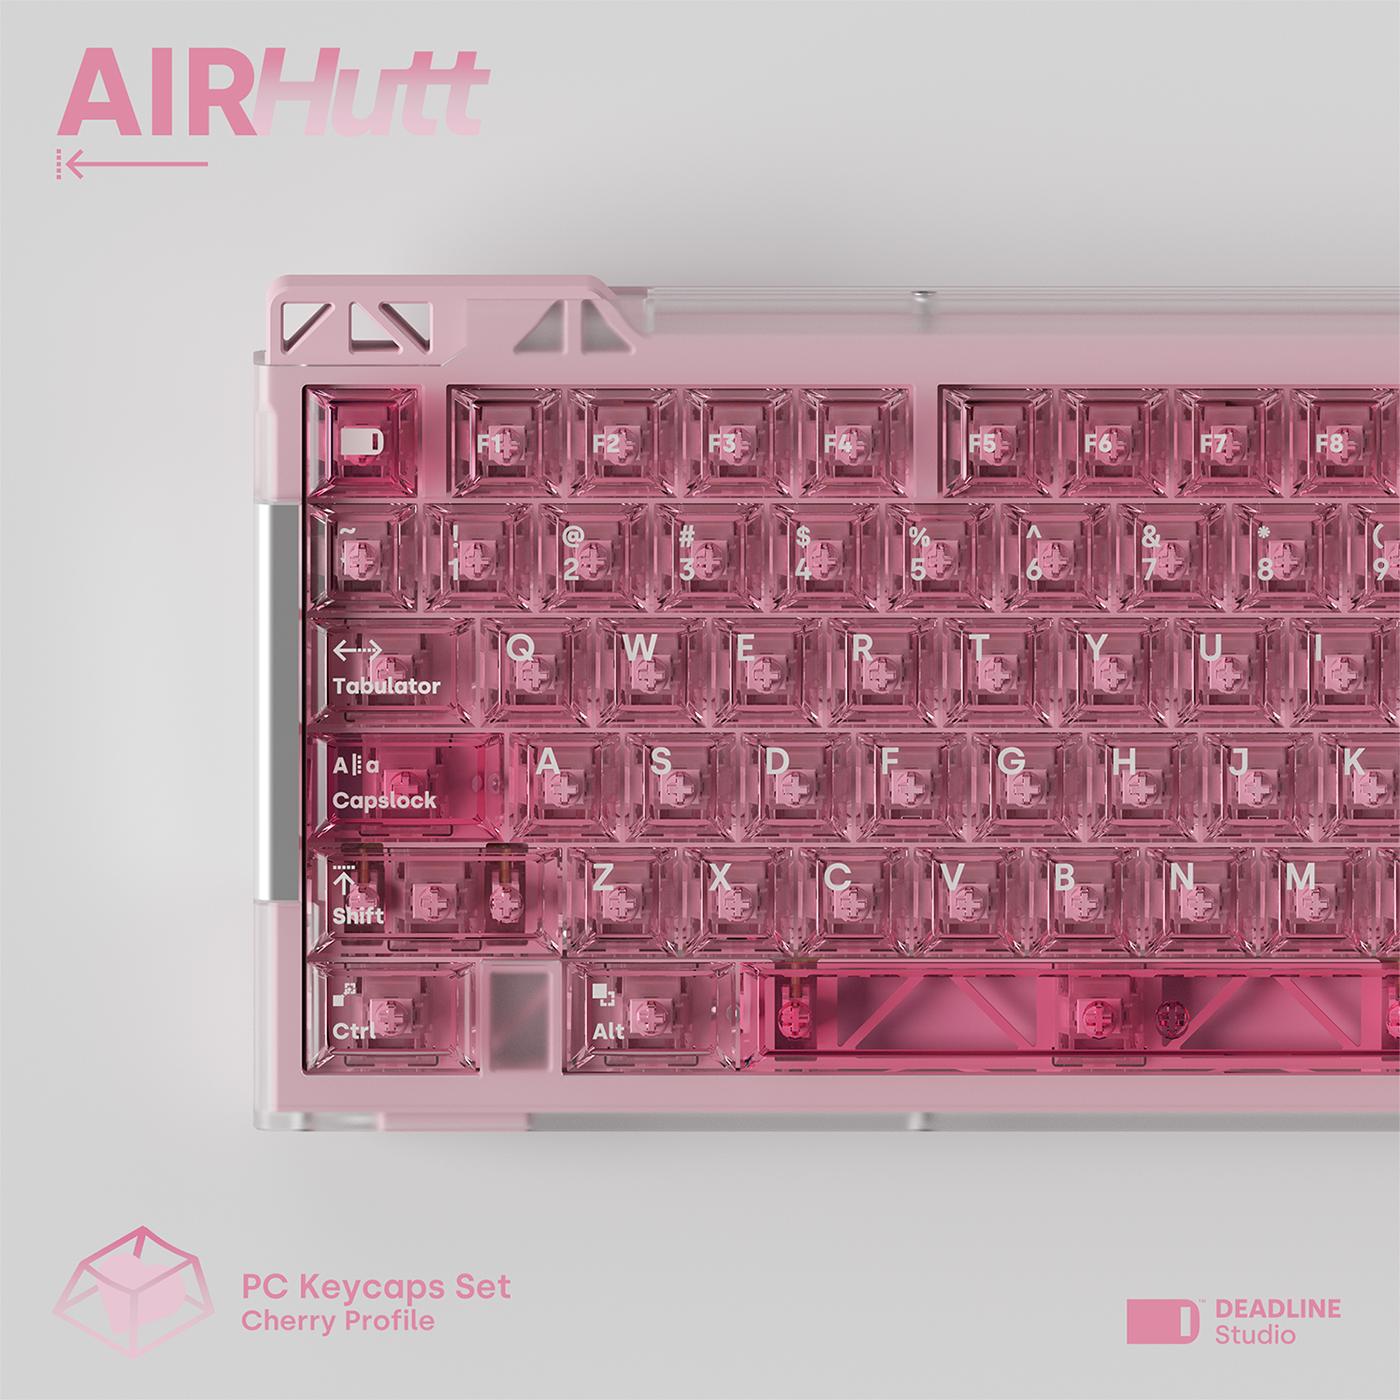 GB Ended | AIR Hutt PC Keycapset by Deadline Studio